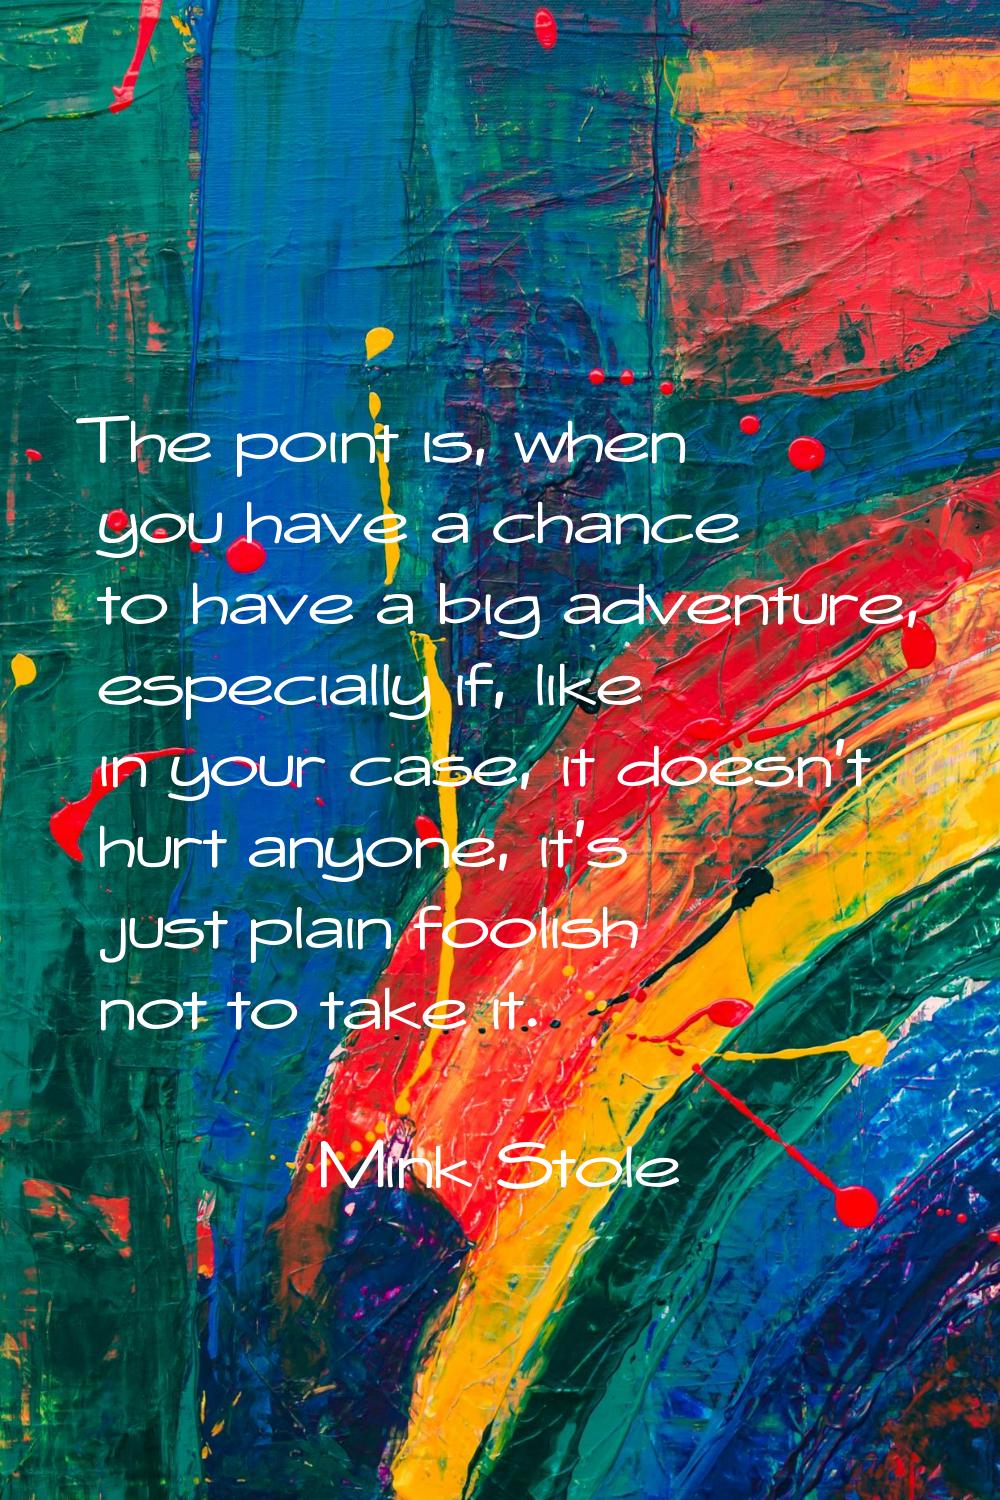 The point is, when you have a chance to have a big adventure, especially if, like in your case, it 